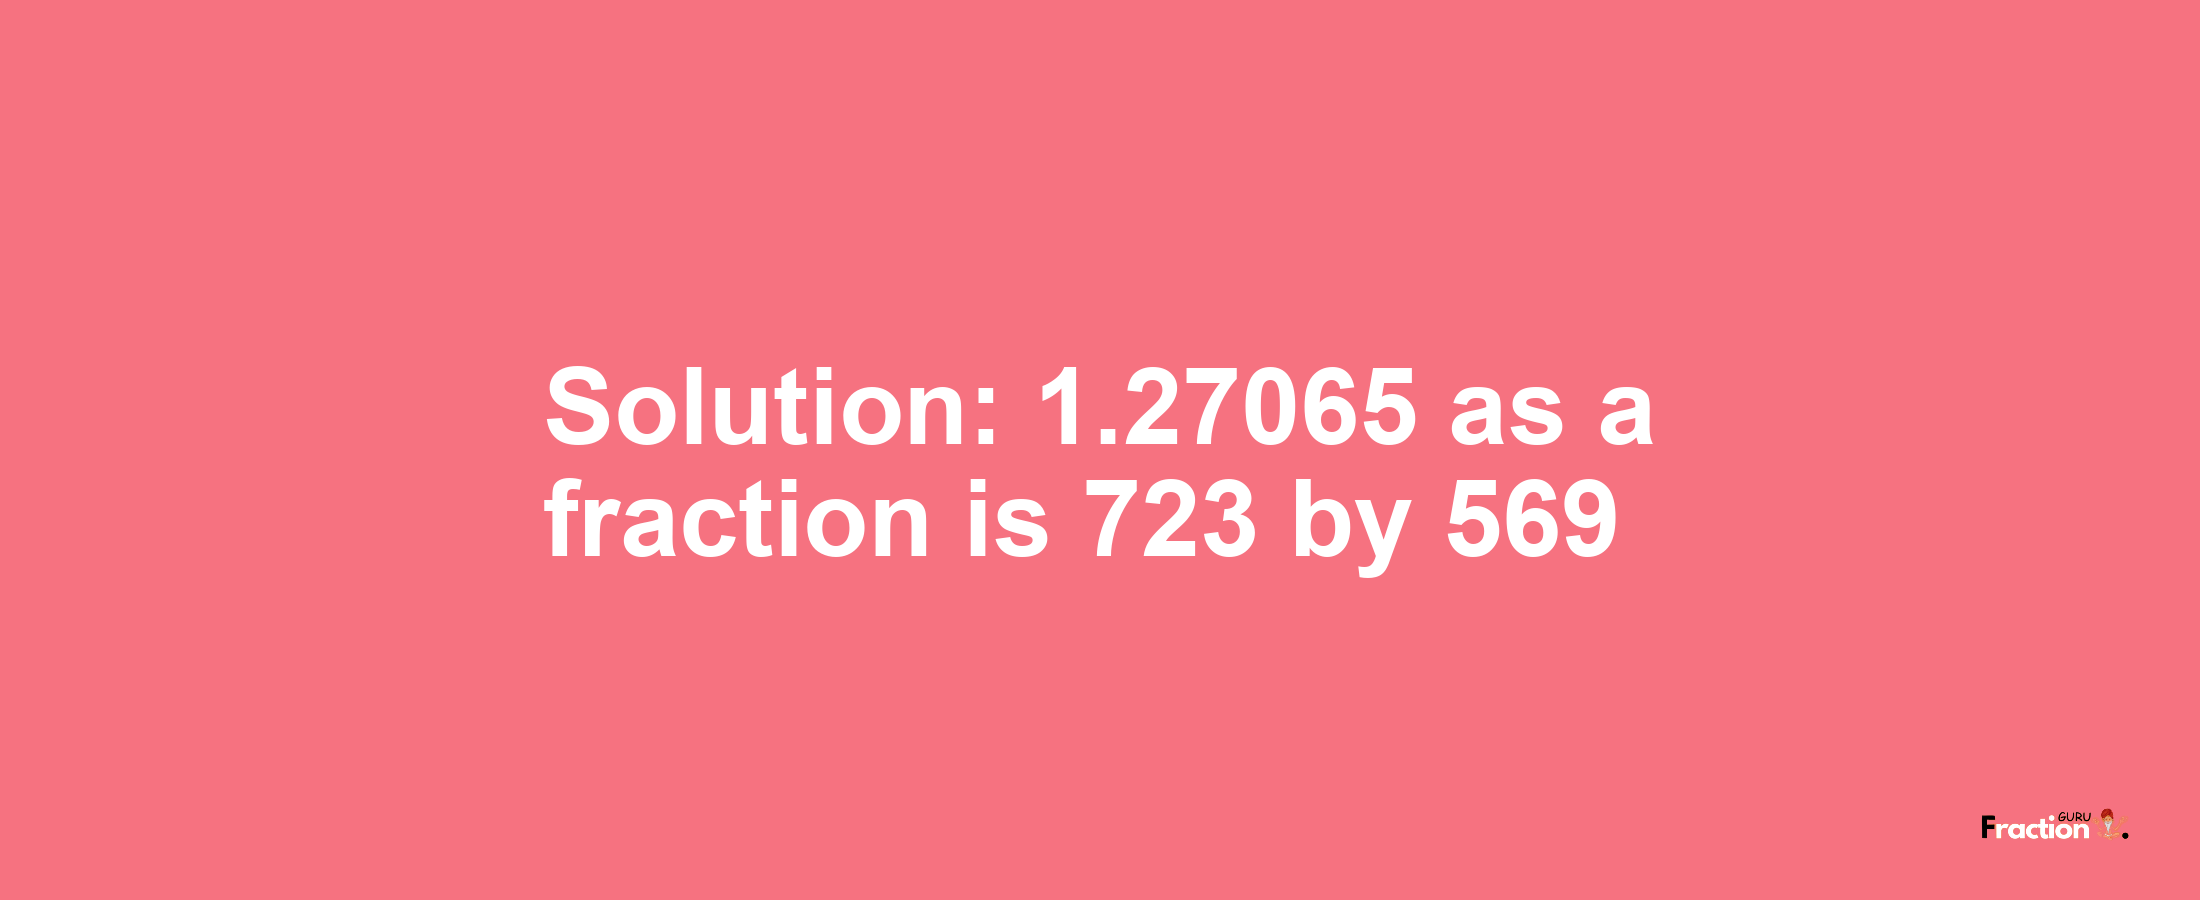 Solution:1.27065 as a fraction is 723/569